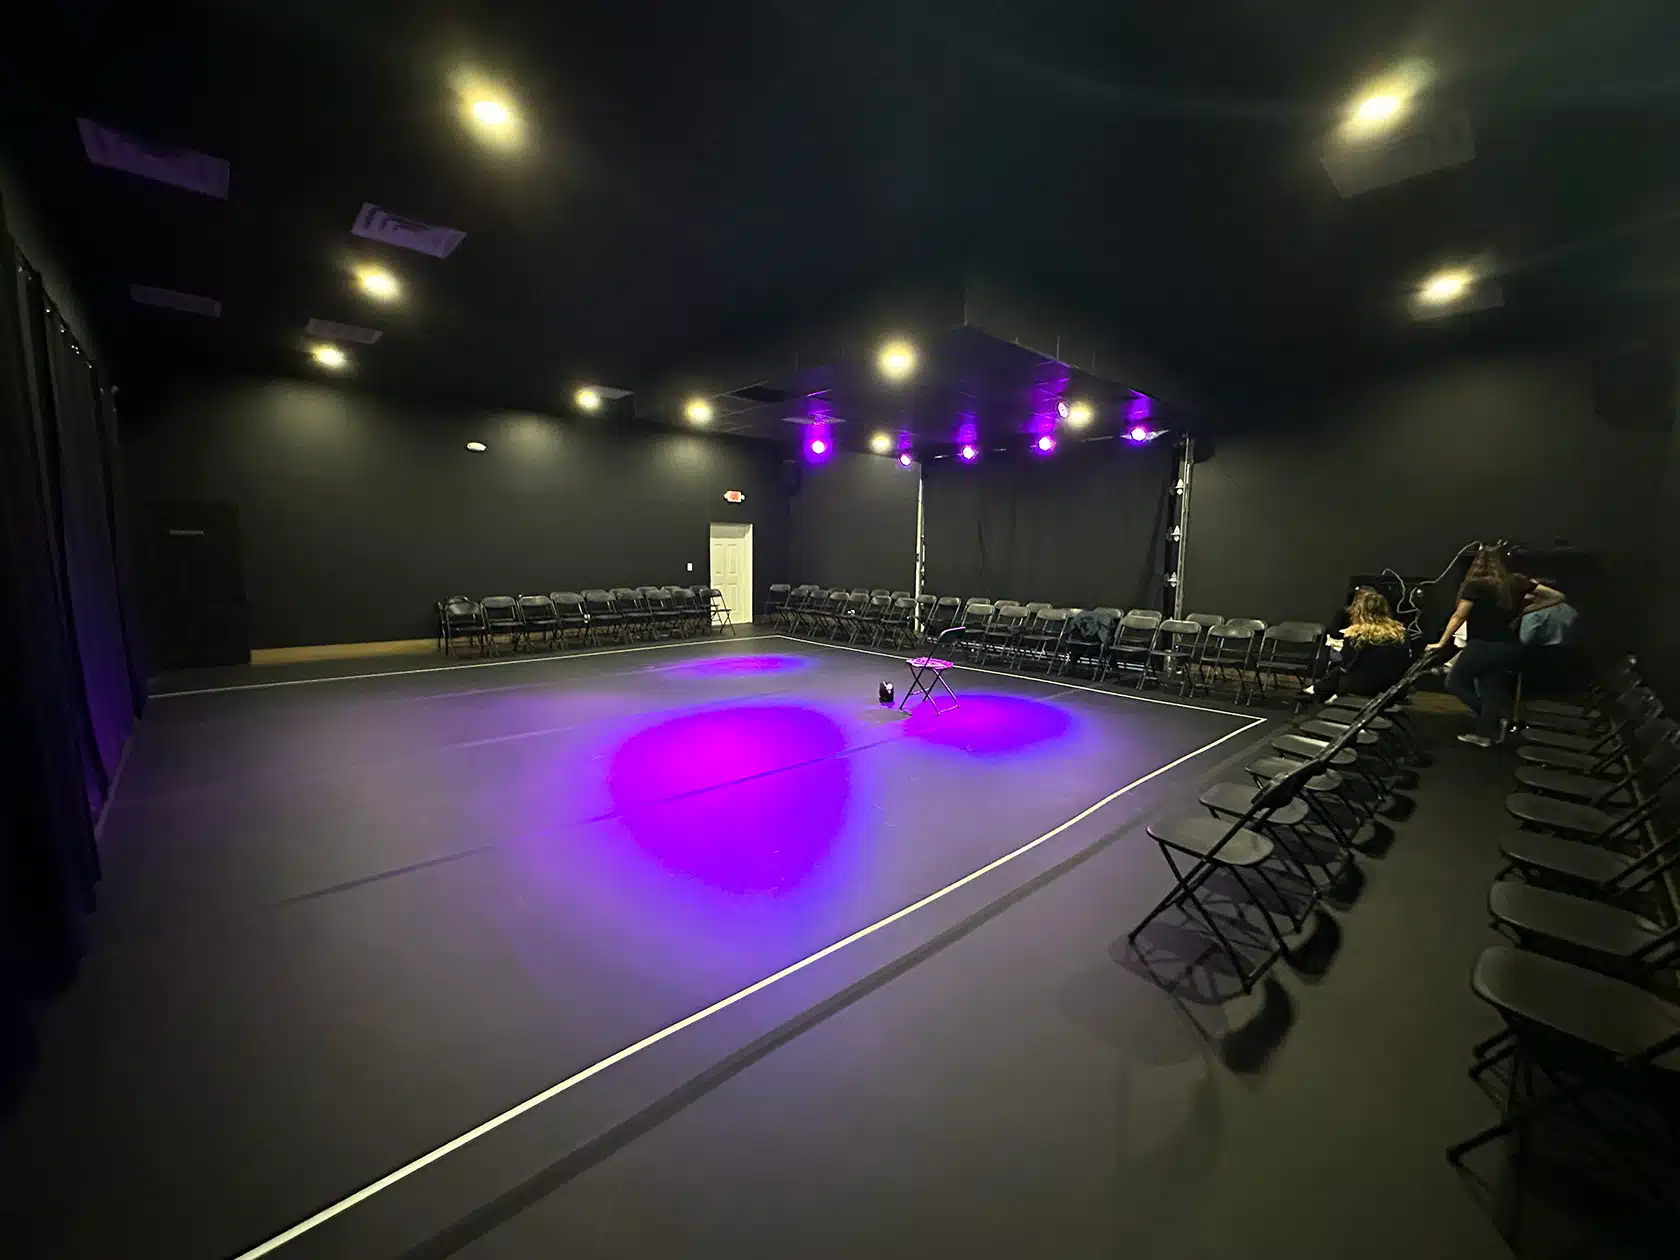 Chairs set around the dance floor of the Holy City Dance Center facility in Daniel Island